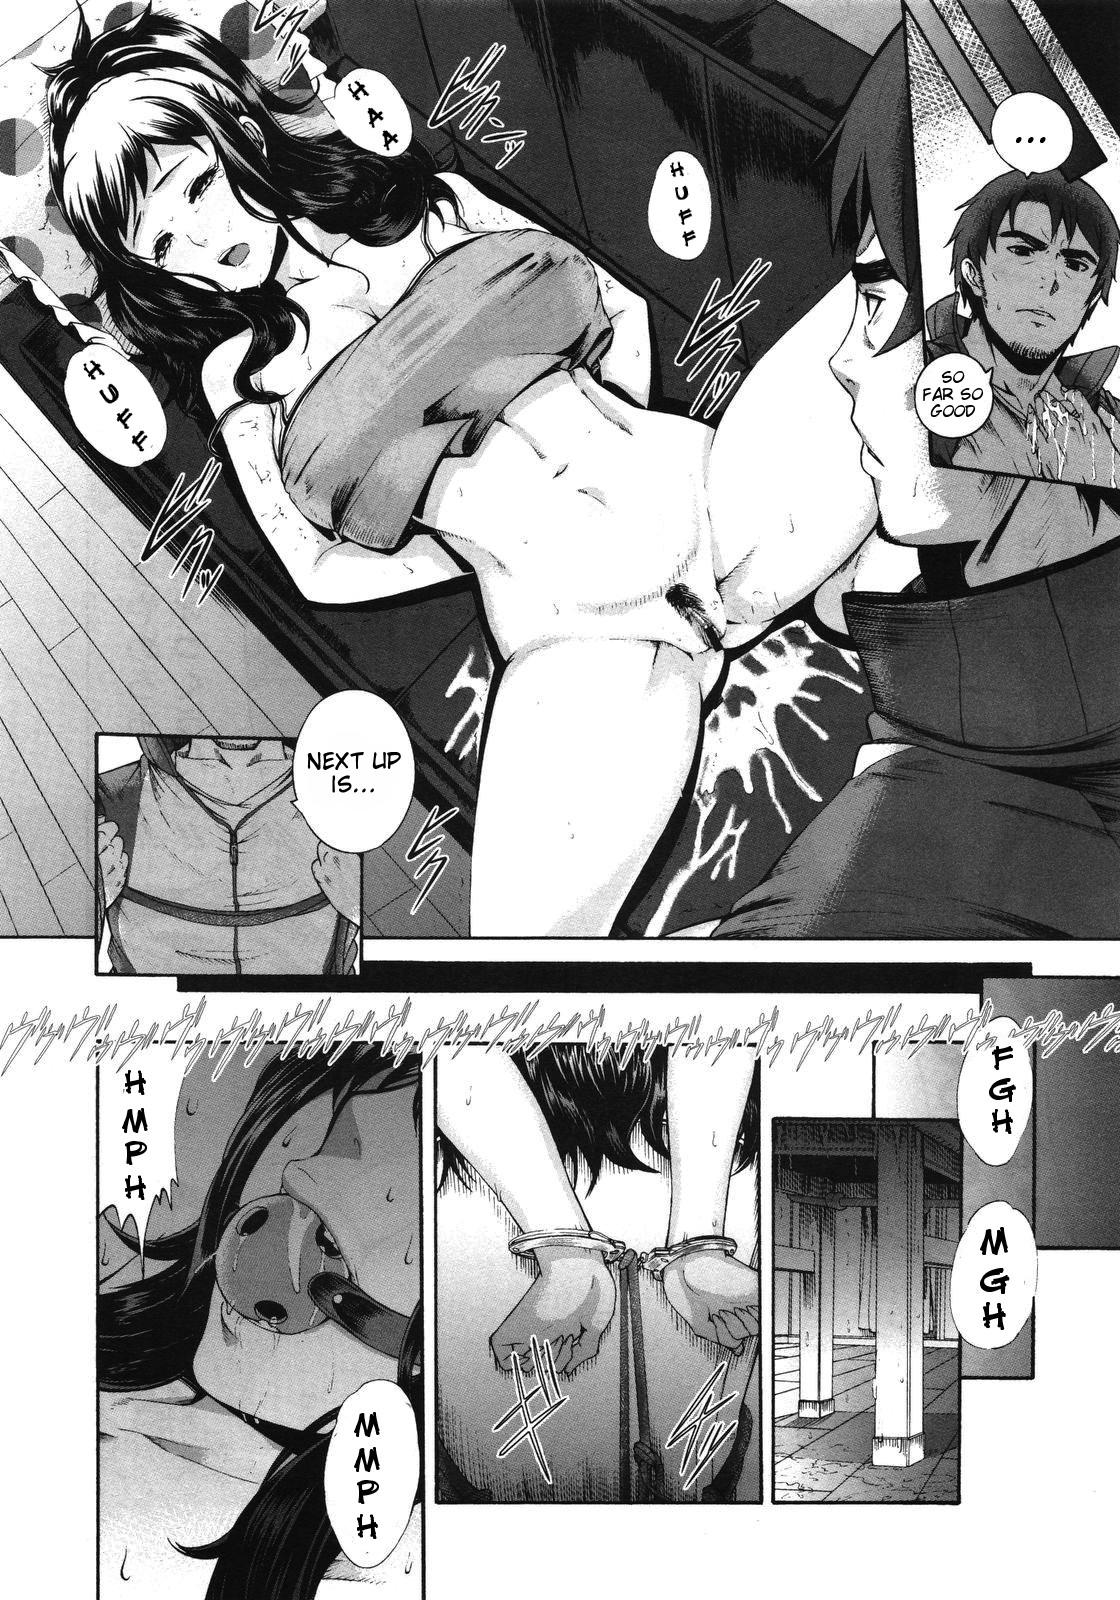 Hot Women Fucking Konna Ani no Imouto Dakara | Animoca - It's Because I'm a Sister to Such a Brother Gay Shop - Page 10